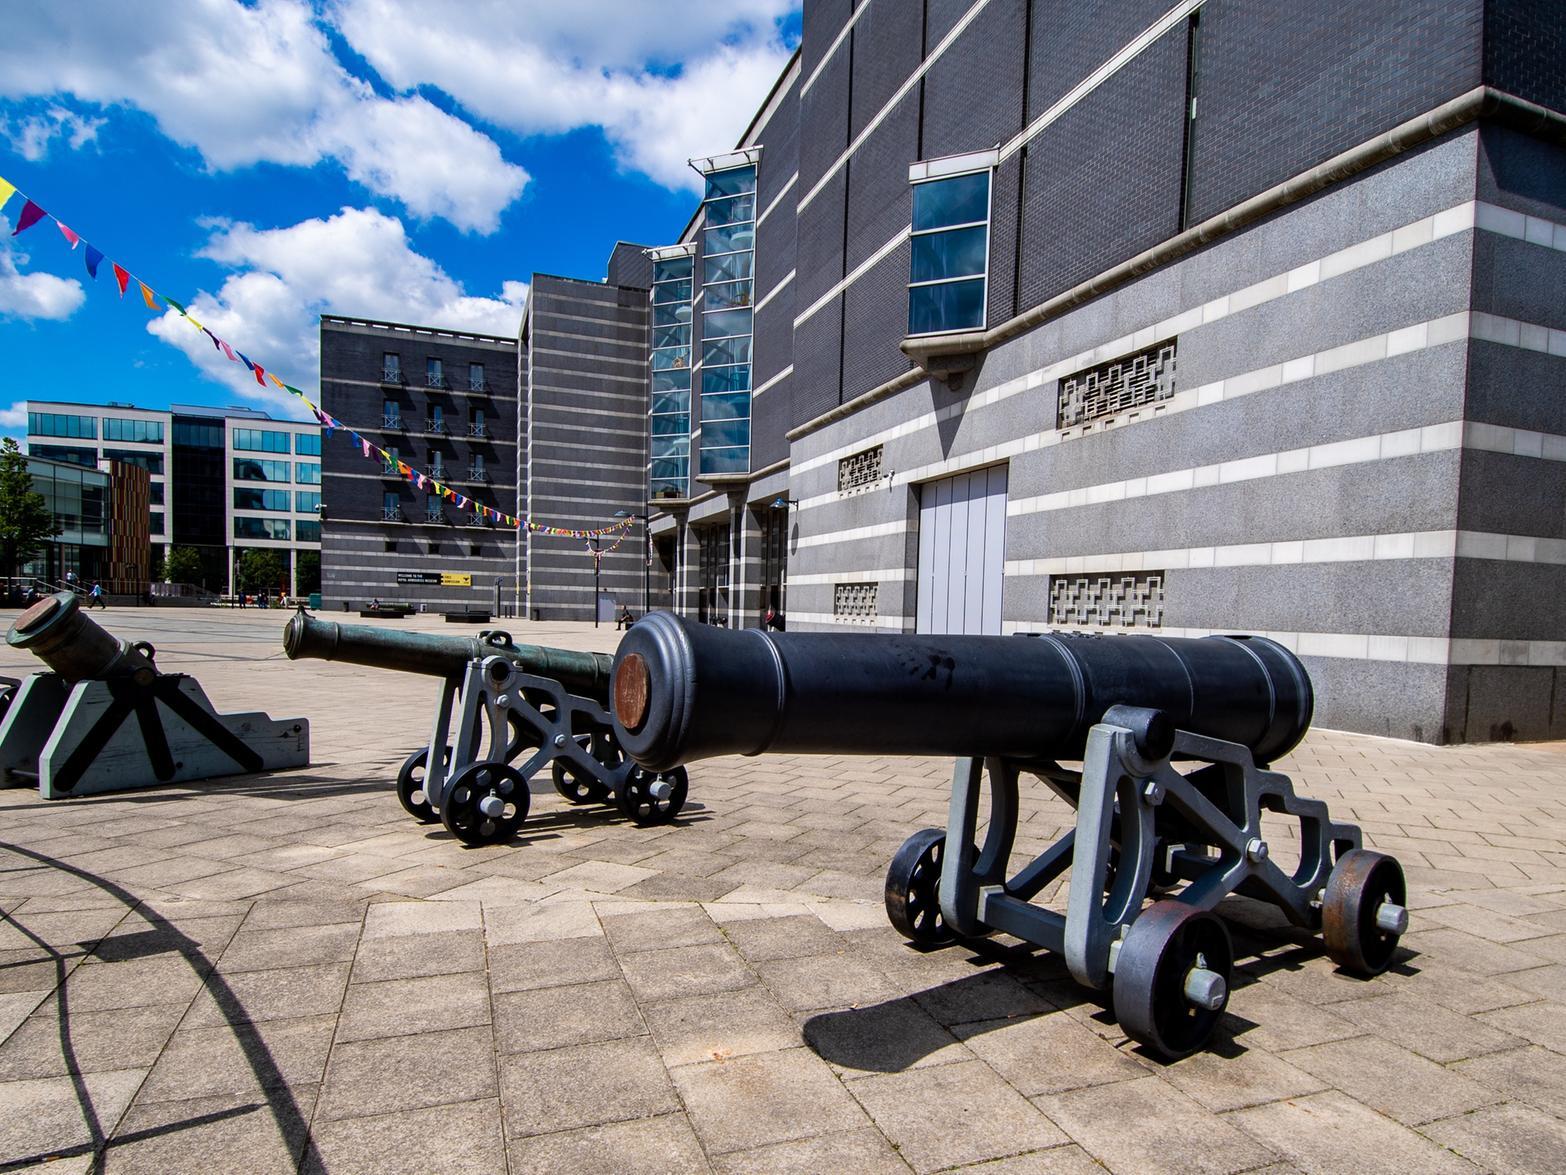 Leeds' most popular museum at the Docks, which has weaponry from throughout the centuries, attracted 2.3million visitors through its doors last year